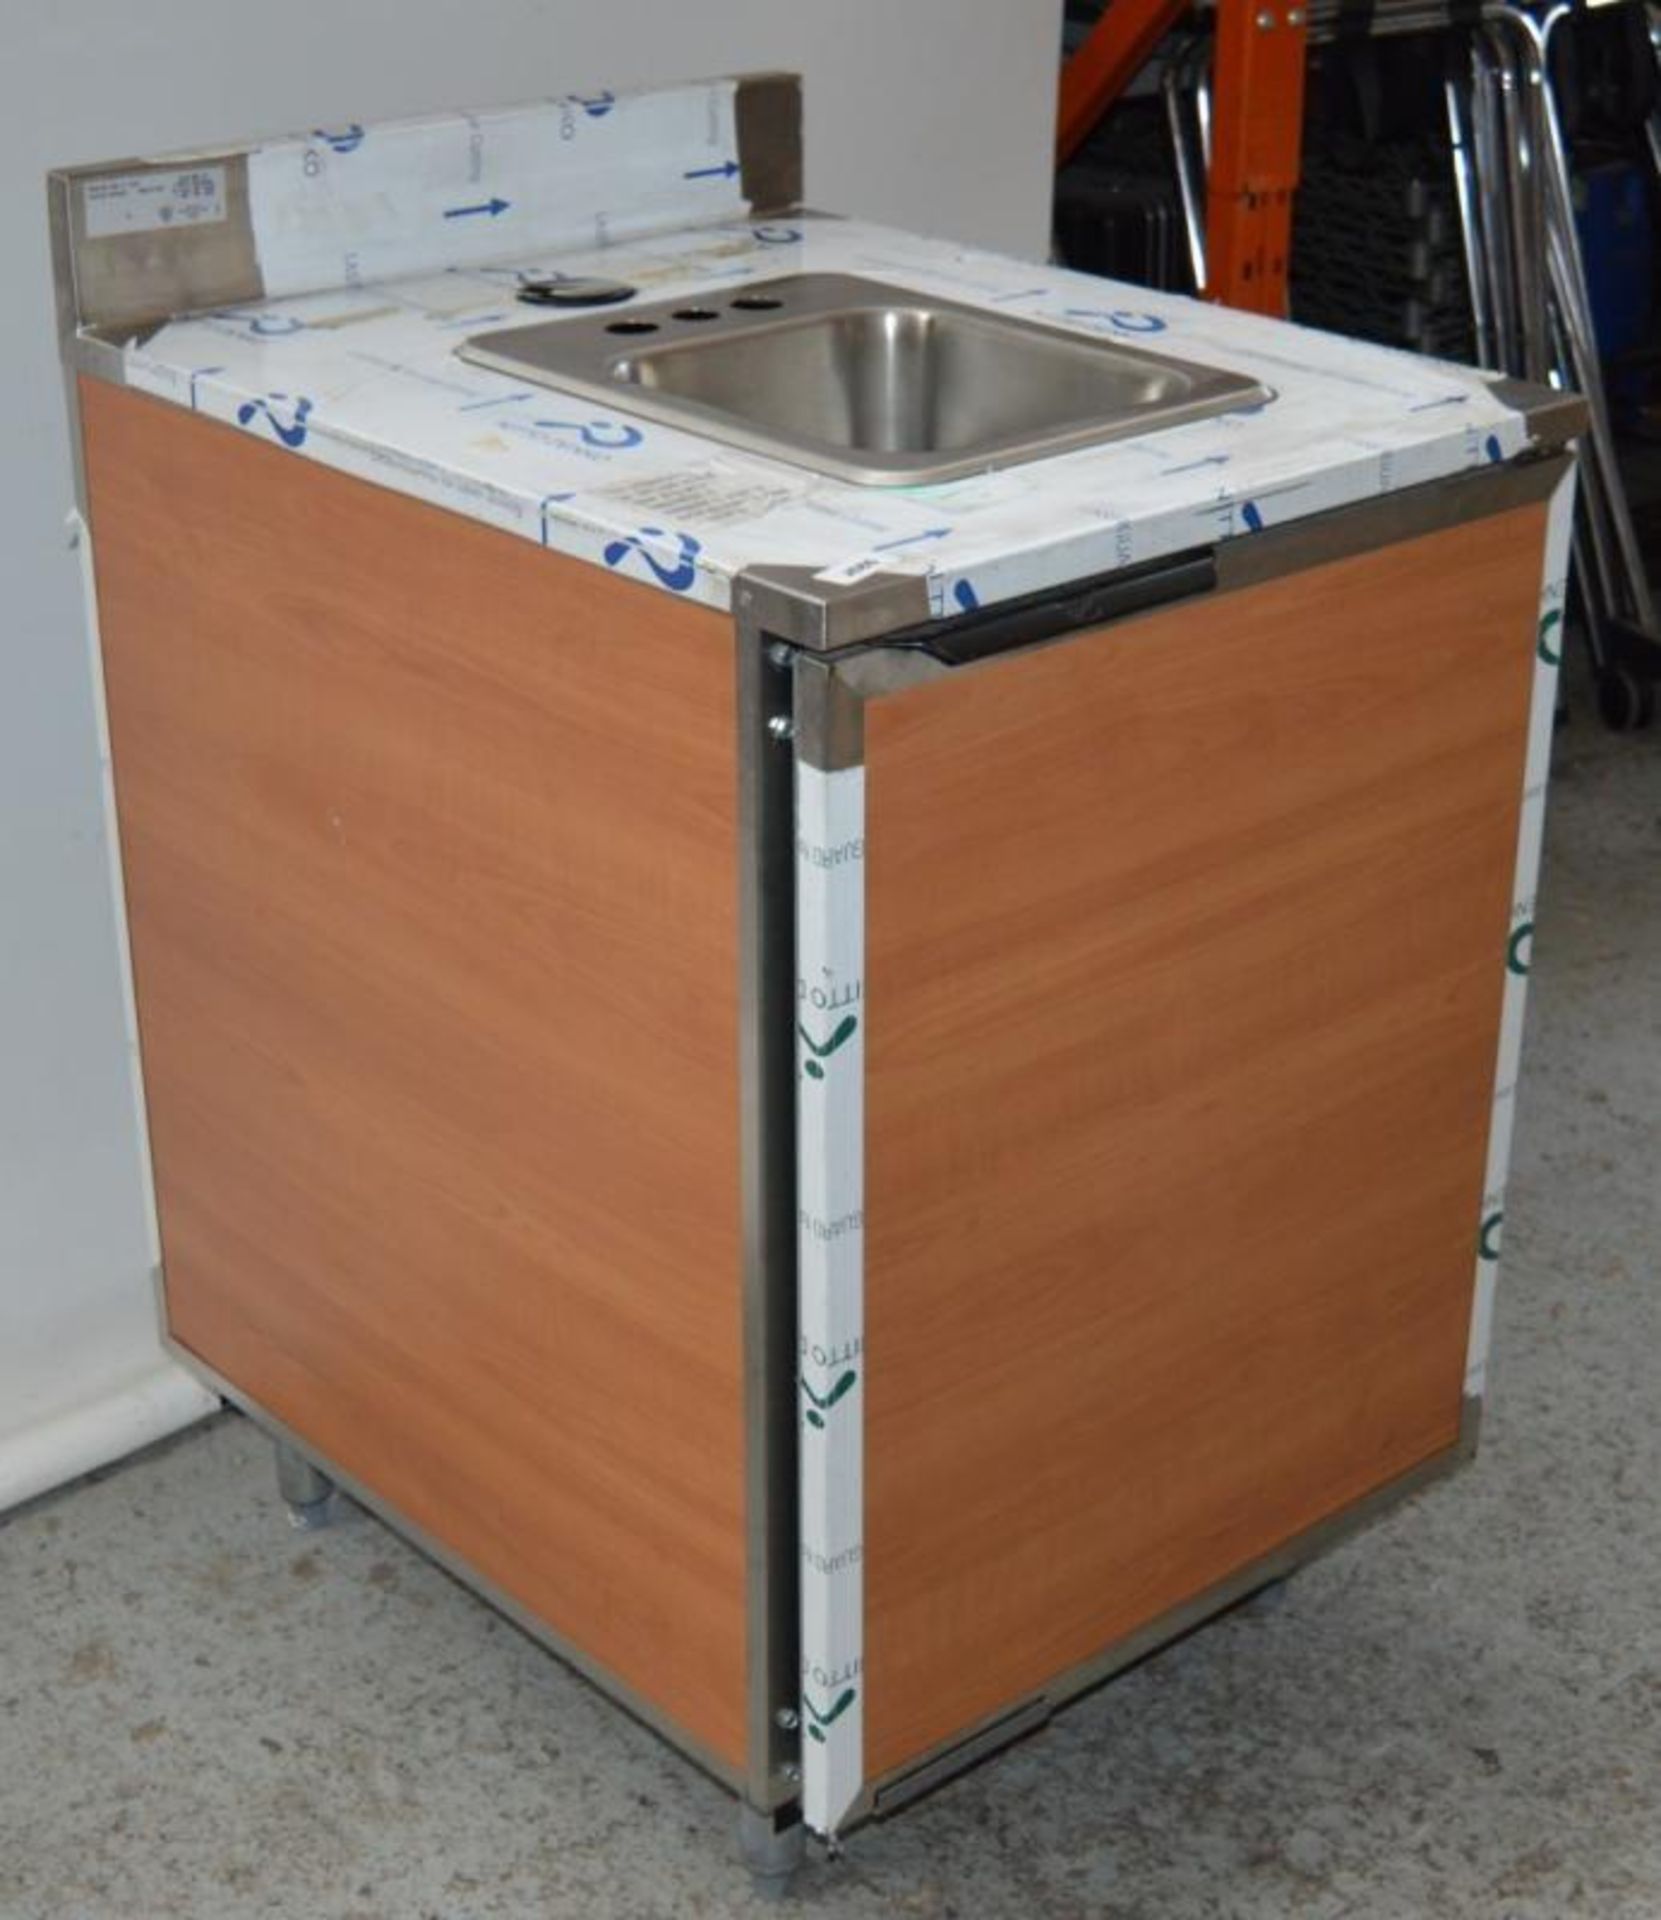 1 x Duke Stainless Steel Sink Basin Unit With Wood Finish Cabinet - Unused With Protective Film Atta - Image 5 of 7